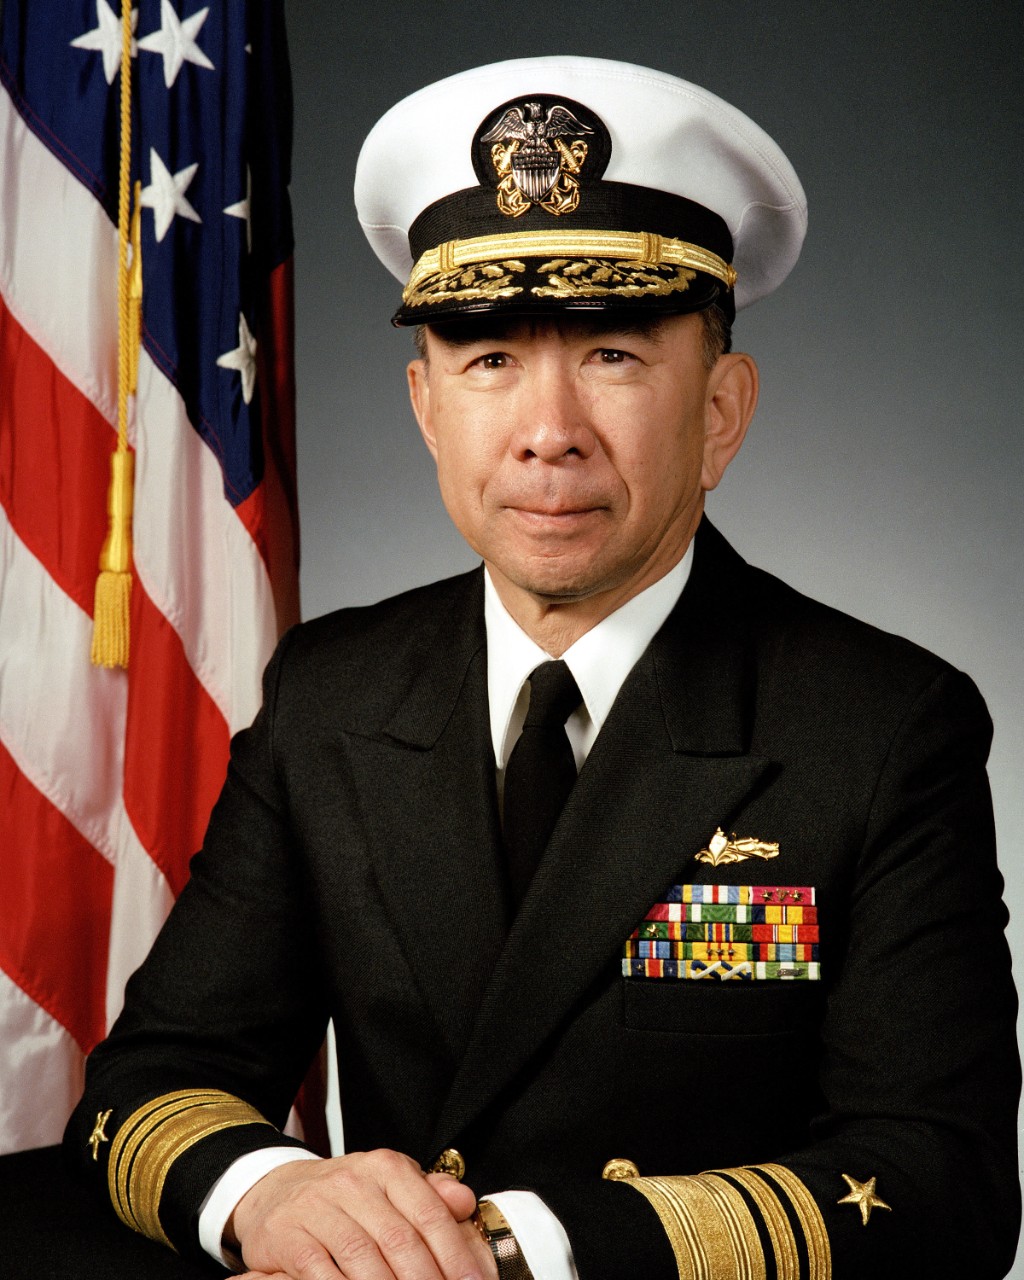 330-CFD-DN-SC-91-11727:   Vice Admiral Robert K. U. Kihune, USN, 1991. Portrait photograph with cover.   Photographed by Richard L. Oasen, April 4, 1991.  Official U.S. Navy photograph, now in the collections of the National Archives 